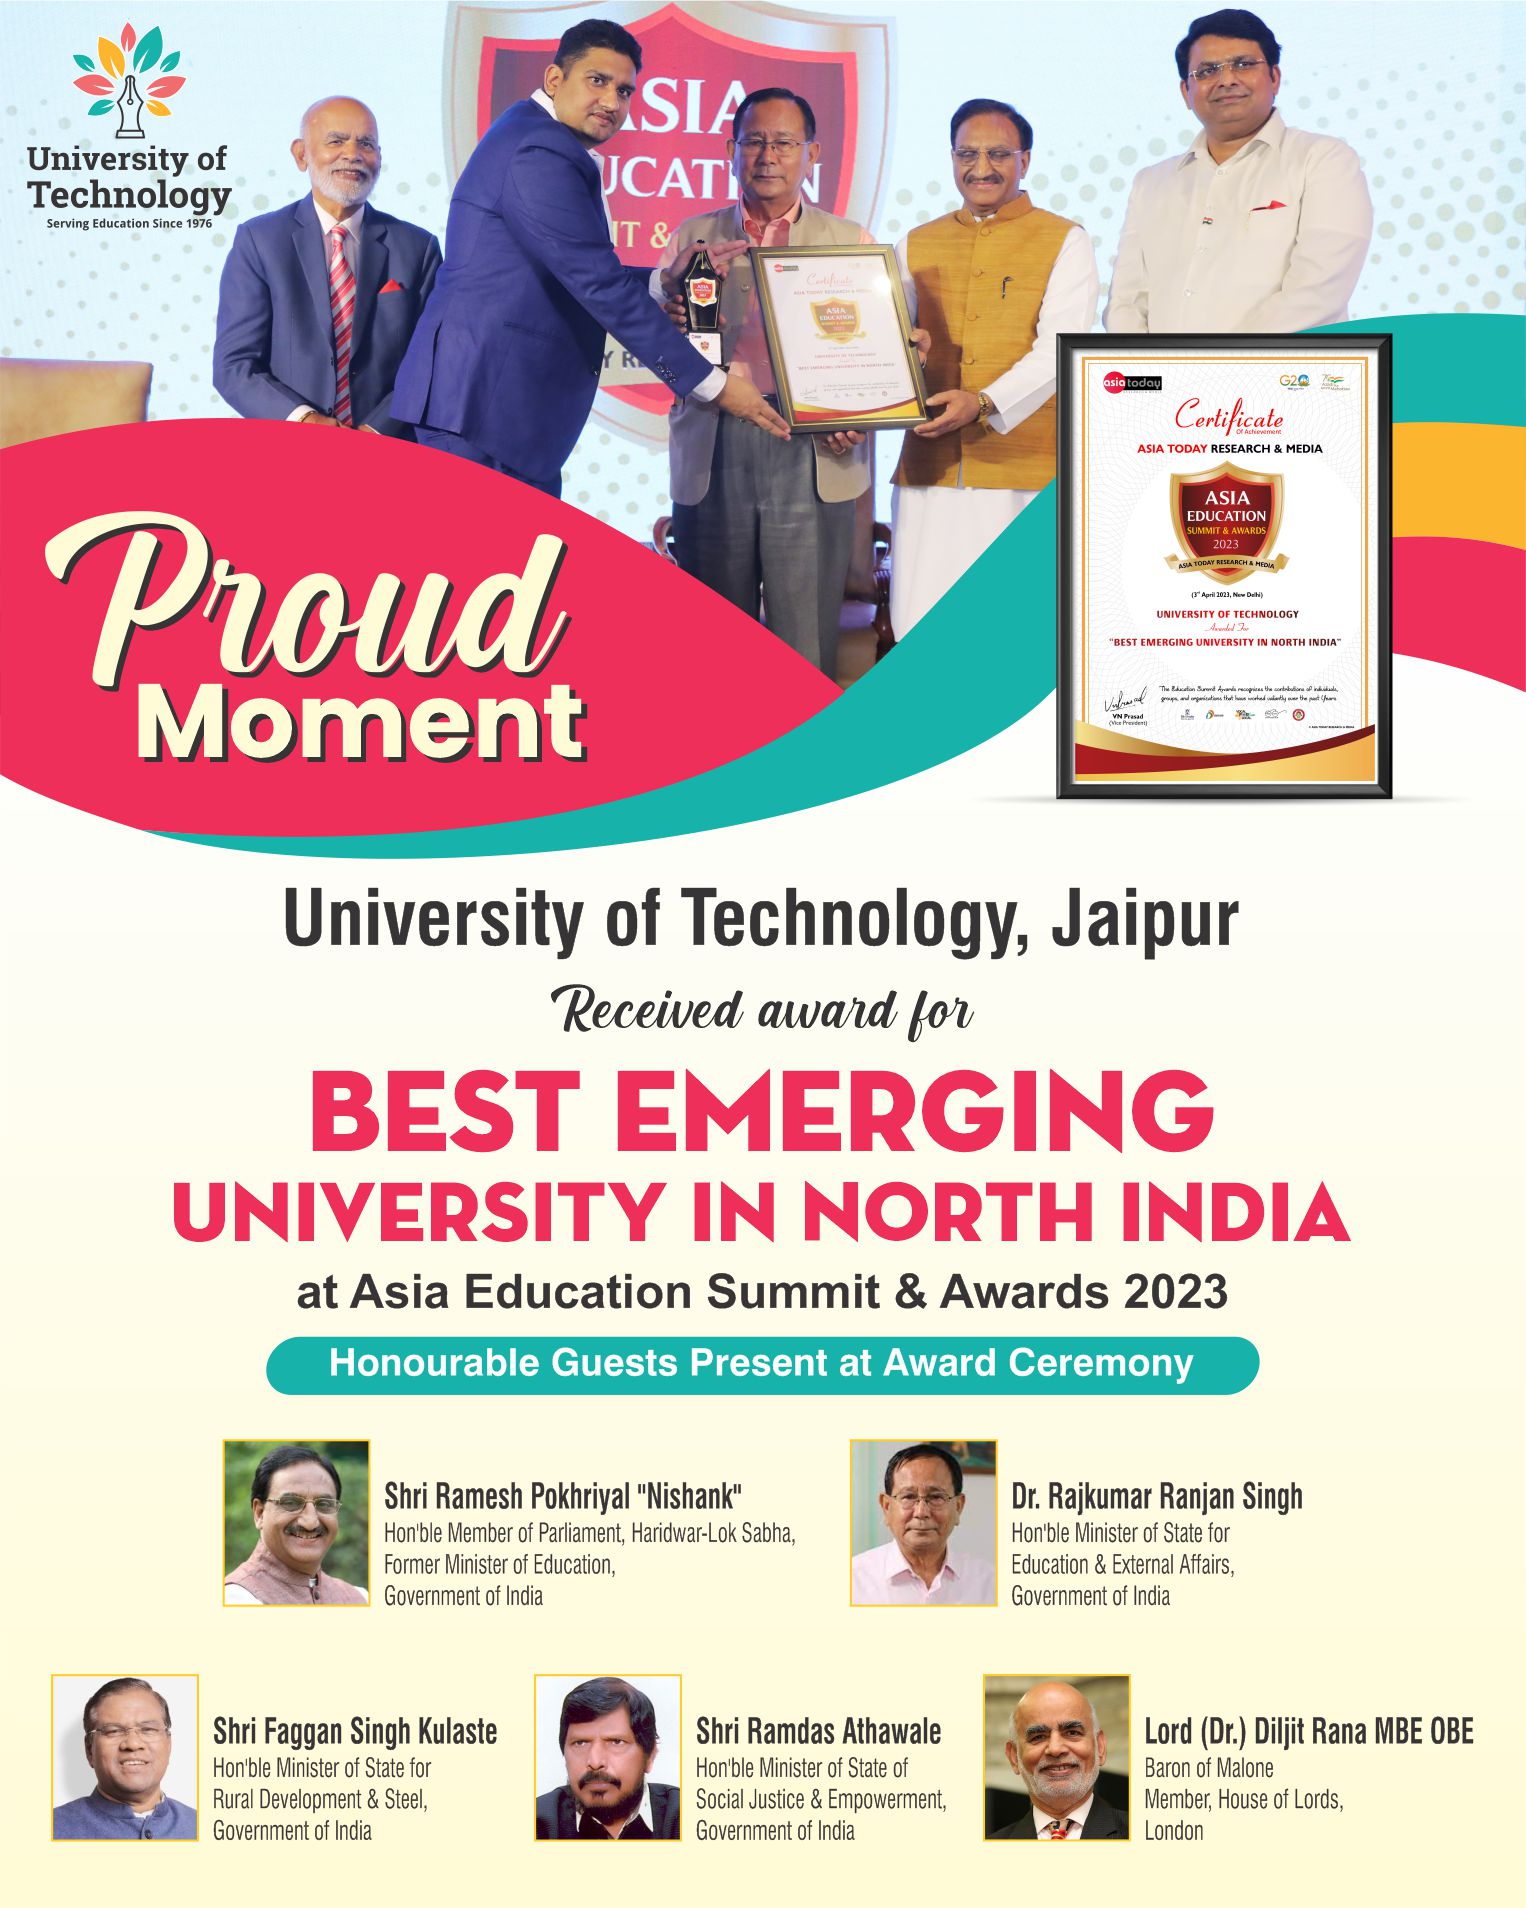 University of Technology Named Best Emerging University in North India